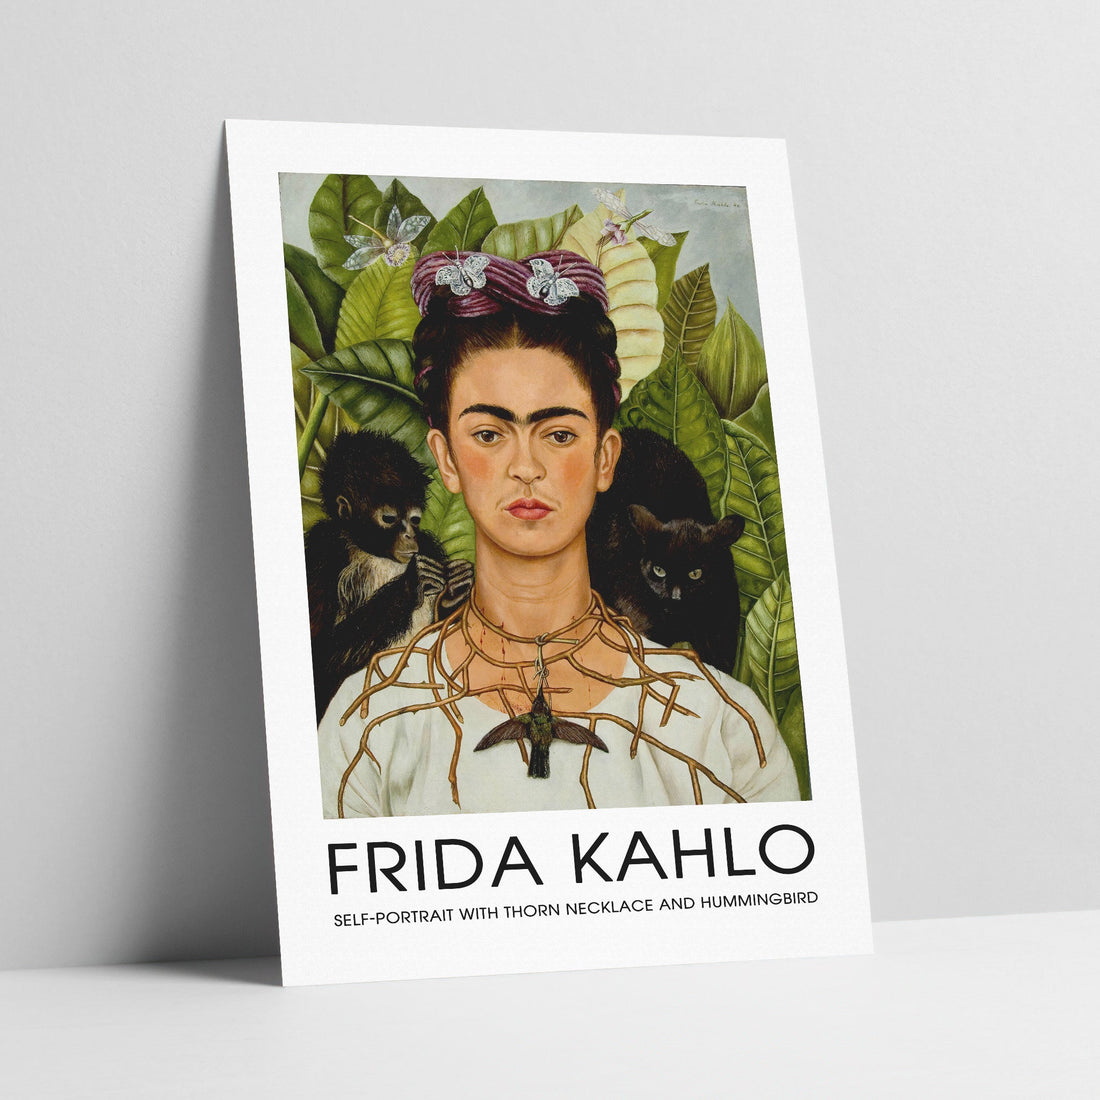 Frida Kahlo Thorn Necklace and Hummingbird Gallery Poster Art Print